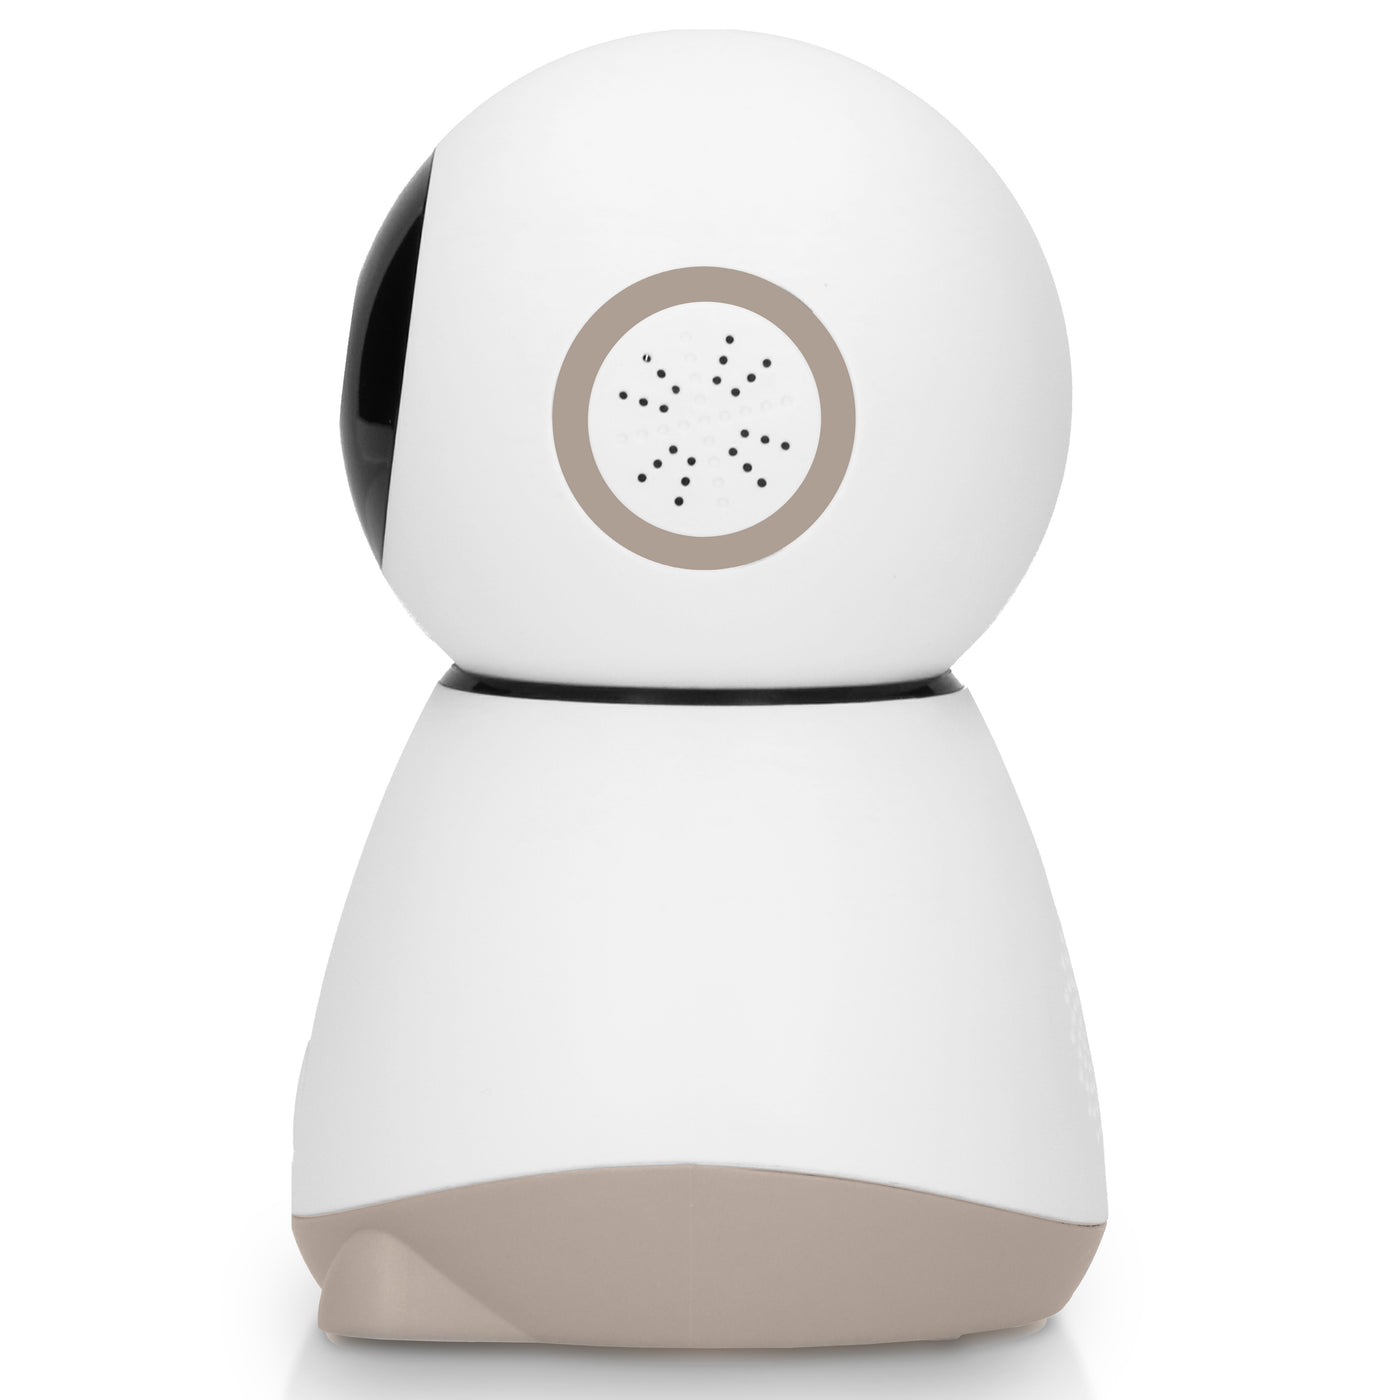 Alecto SMARTBABY10BE - Wi-fi baby monitor with camera, white/taupe